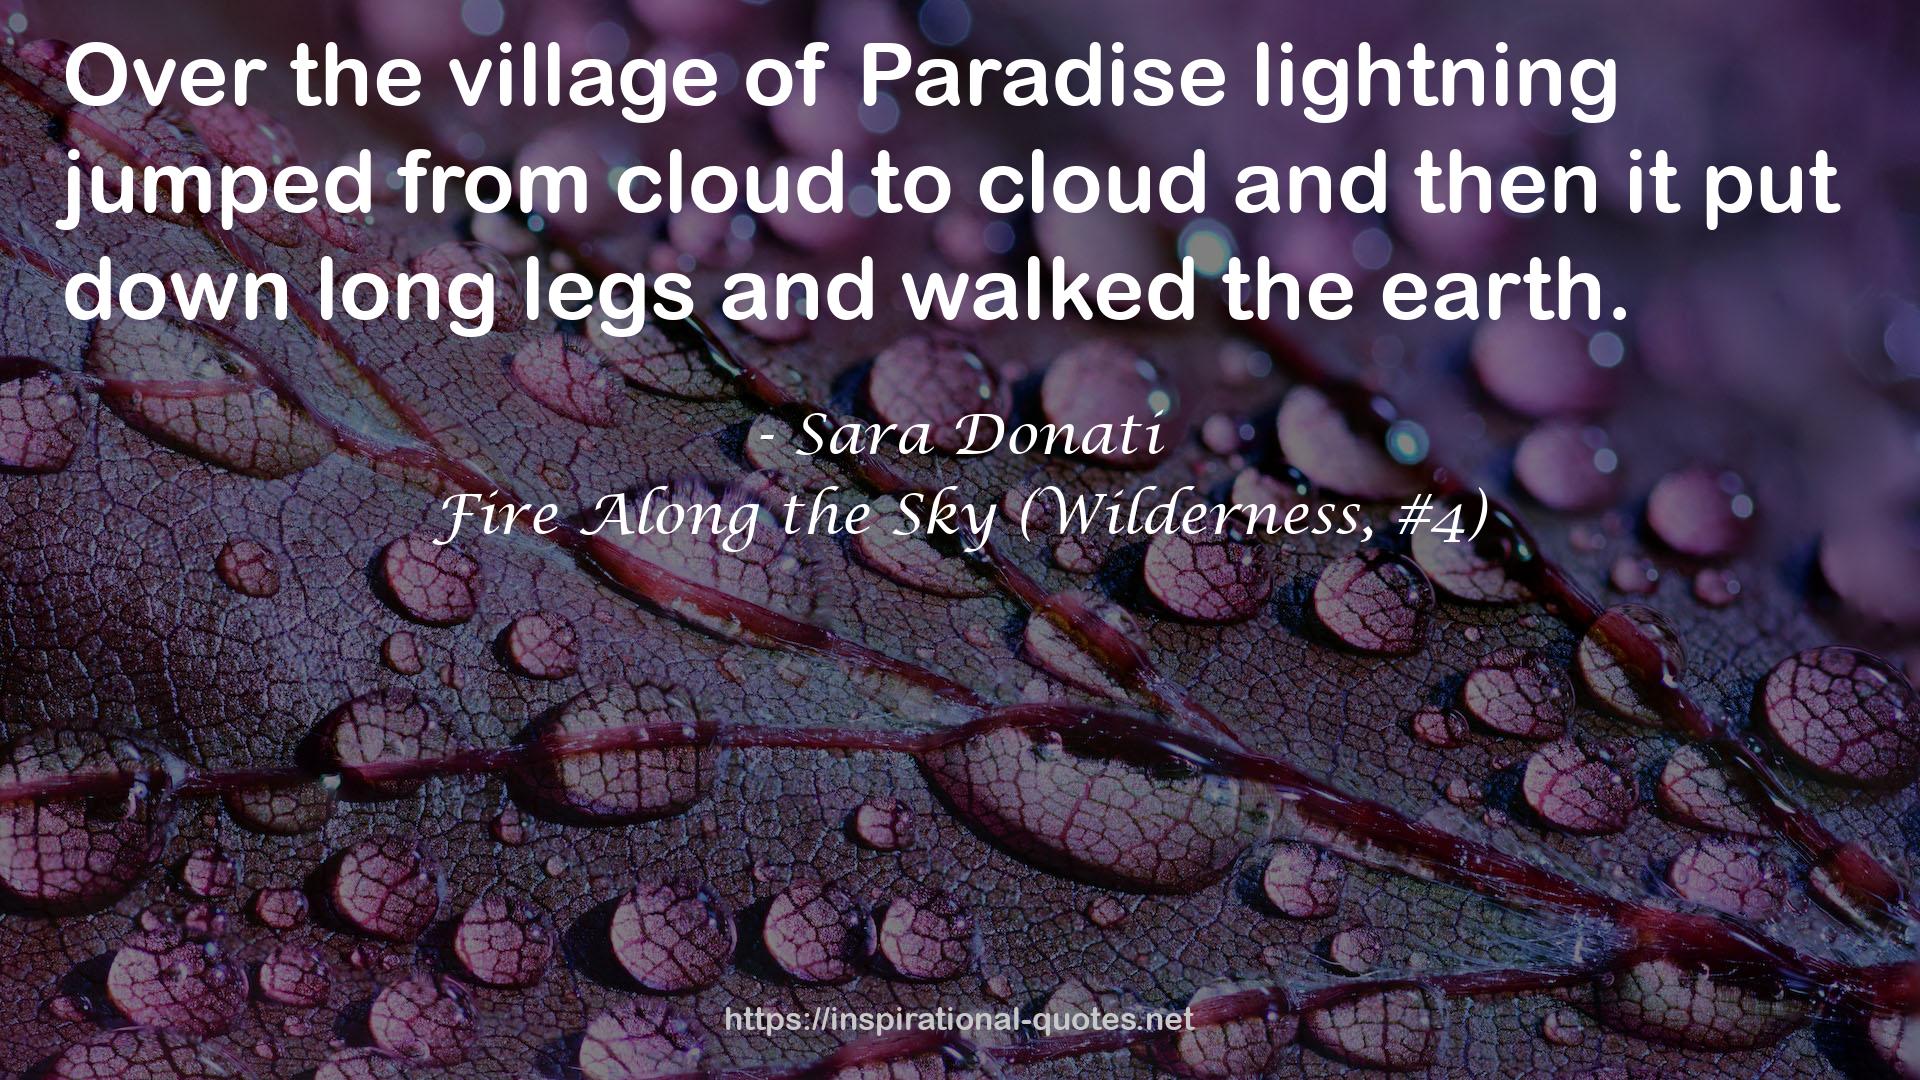 Fire Along the Sky (Wilderness, #4) QUOTES